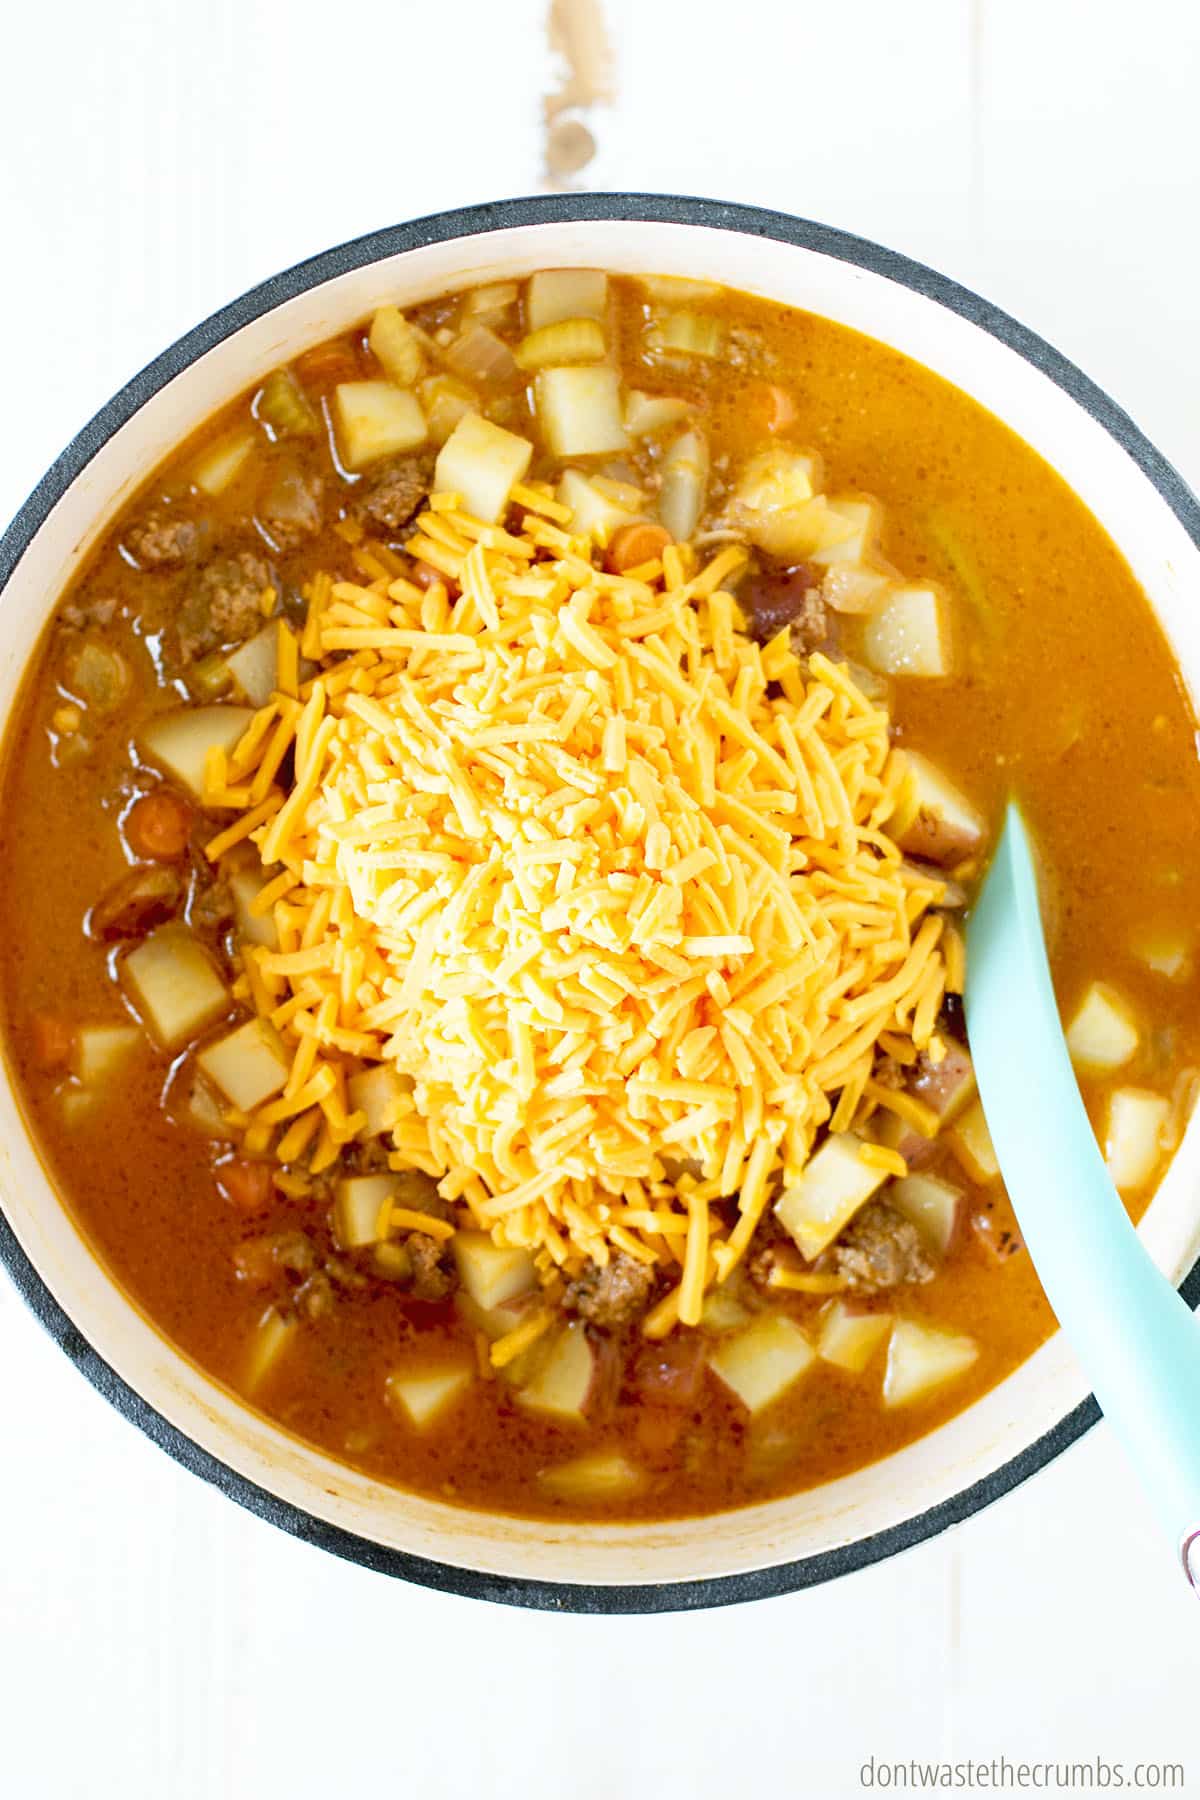 Big pile of shredded cheese in a large put of cheeseburger soup. Large spoon stirring the soup.